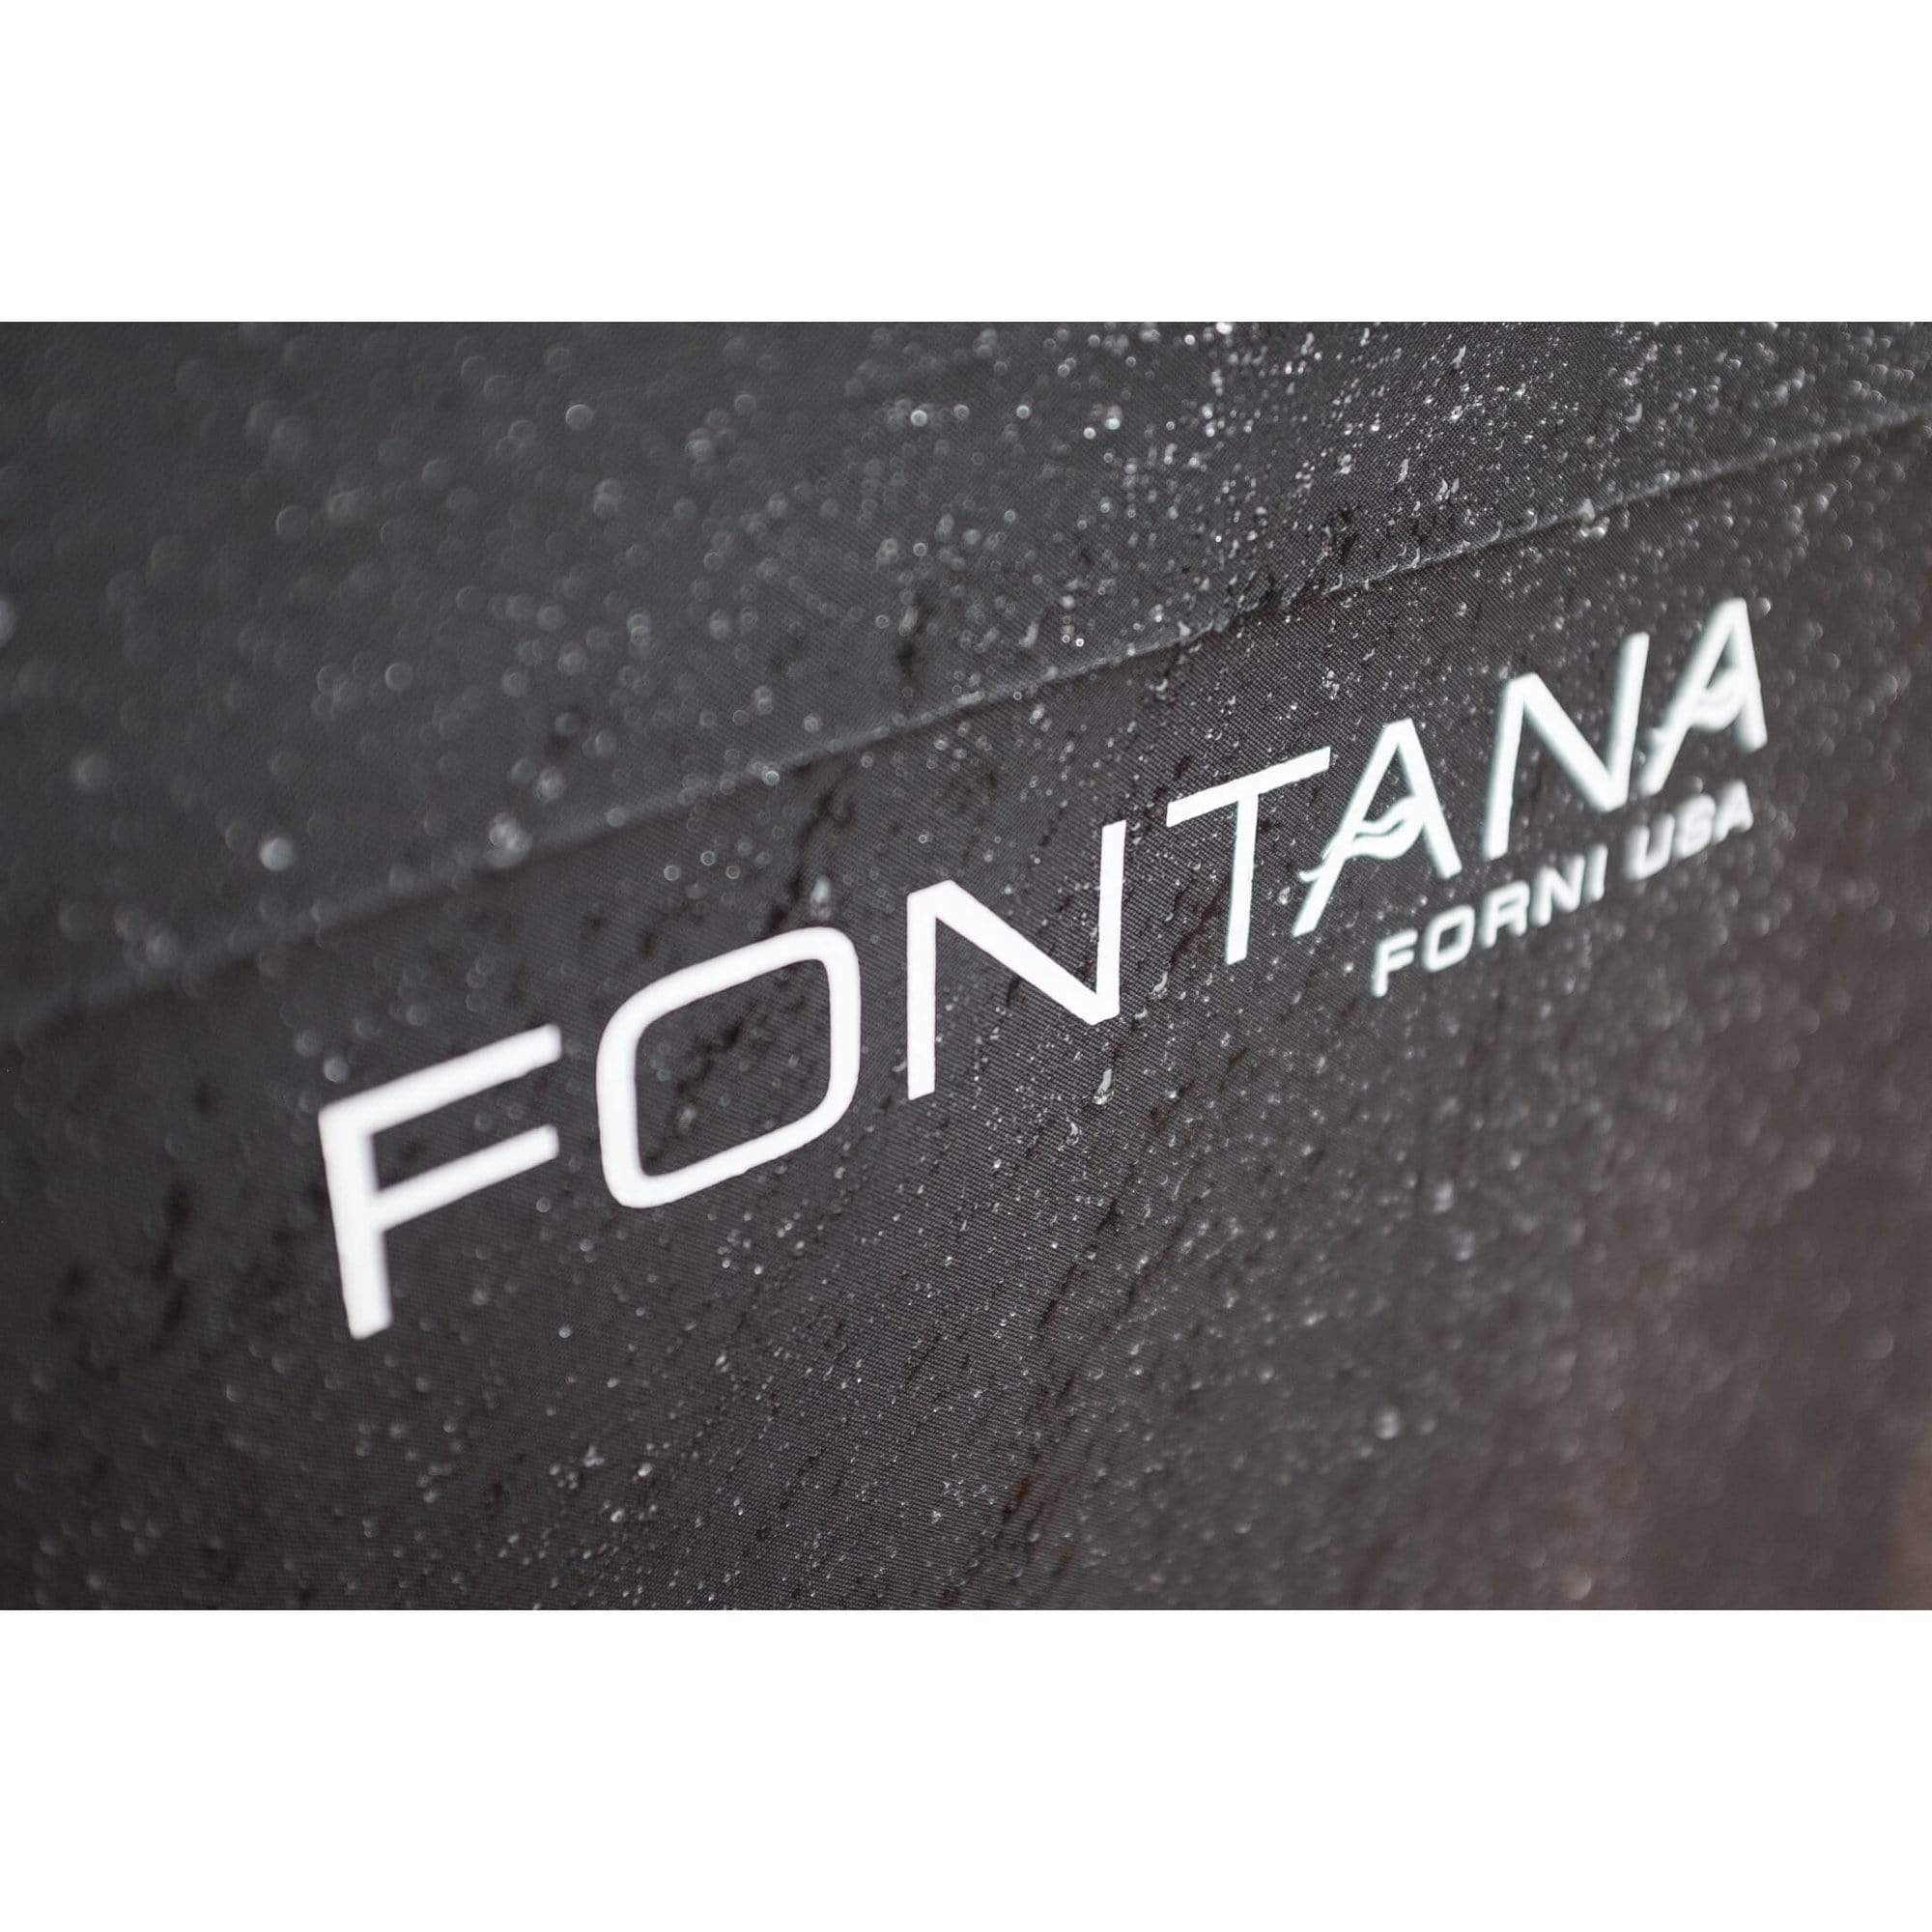 Fontana Weather Cover Standard Full Length Oven Cover (On Cart)